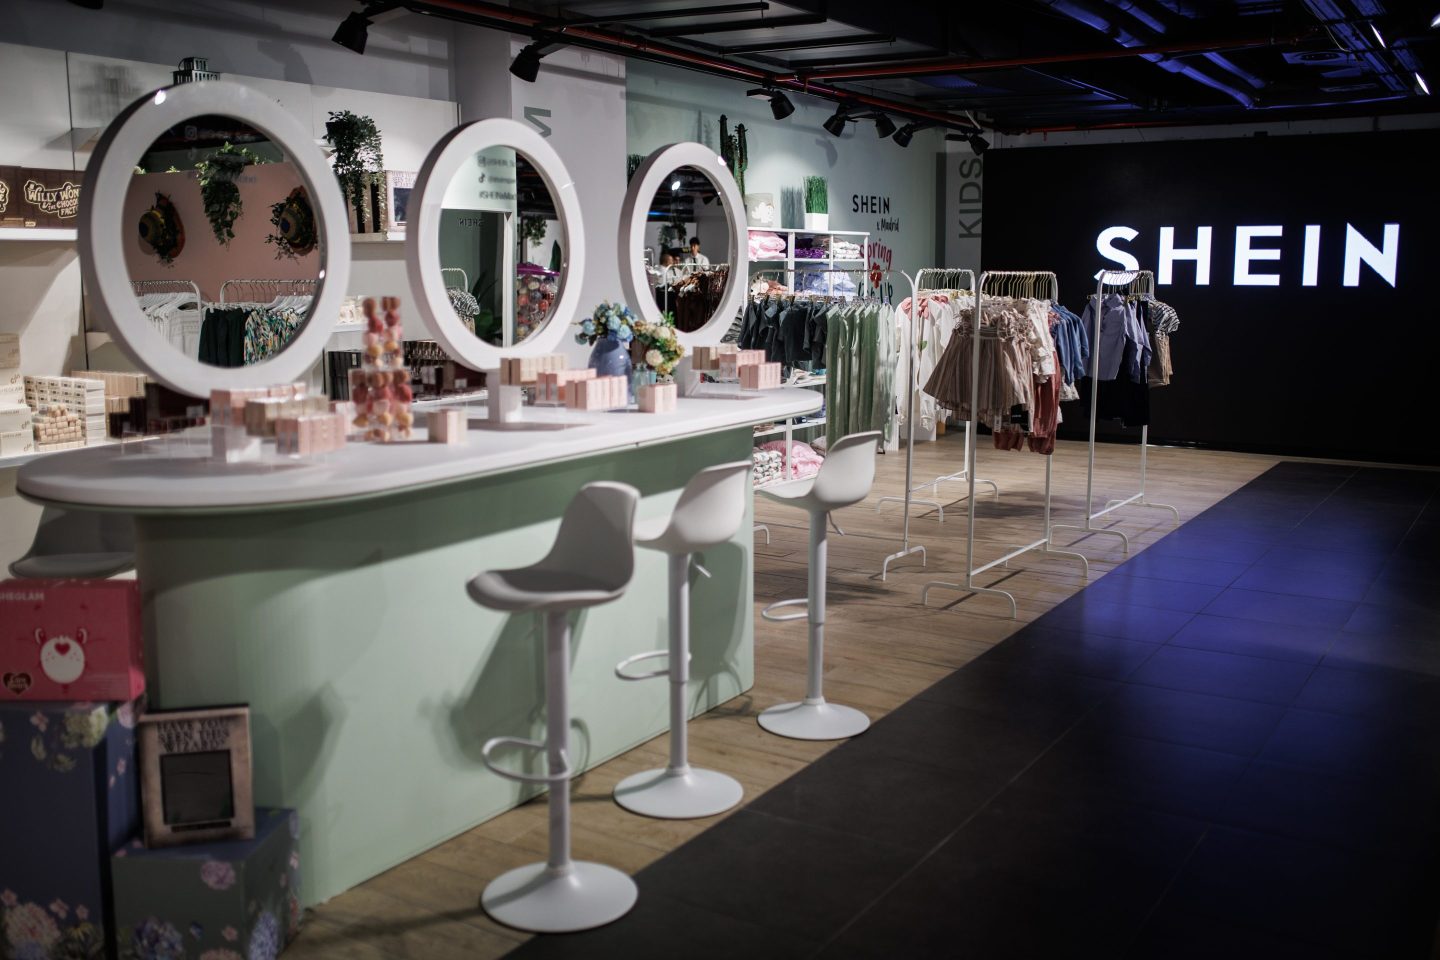 MADRID, SPAIN &#8211; APRIL 26: Exhibitors during the opening of Shein&#8217;s ephemeral store, at ABC Serrano, on 26 April, 2024 in Madrid, Spain. The Shein store opens its doors from tomorrow, April 27, until May 5, becoming the largest pop-up store to date in Spain, with 900 square meters. Shein, founded in 2012, currently operates in more than 150 countries around the world and has key operations centers in Singapore, China and the United States. (Photo By Alejandro Martinez Velez/Europa Press via Getty Images)